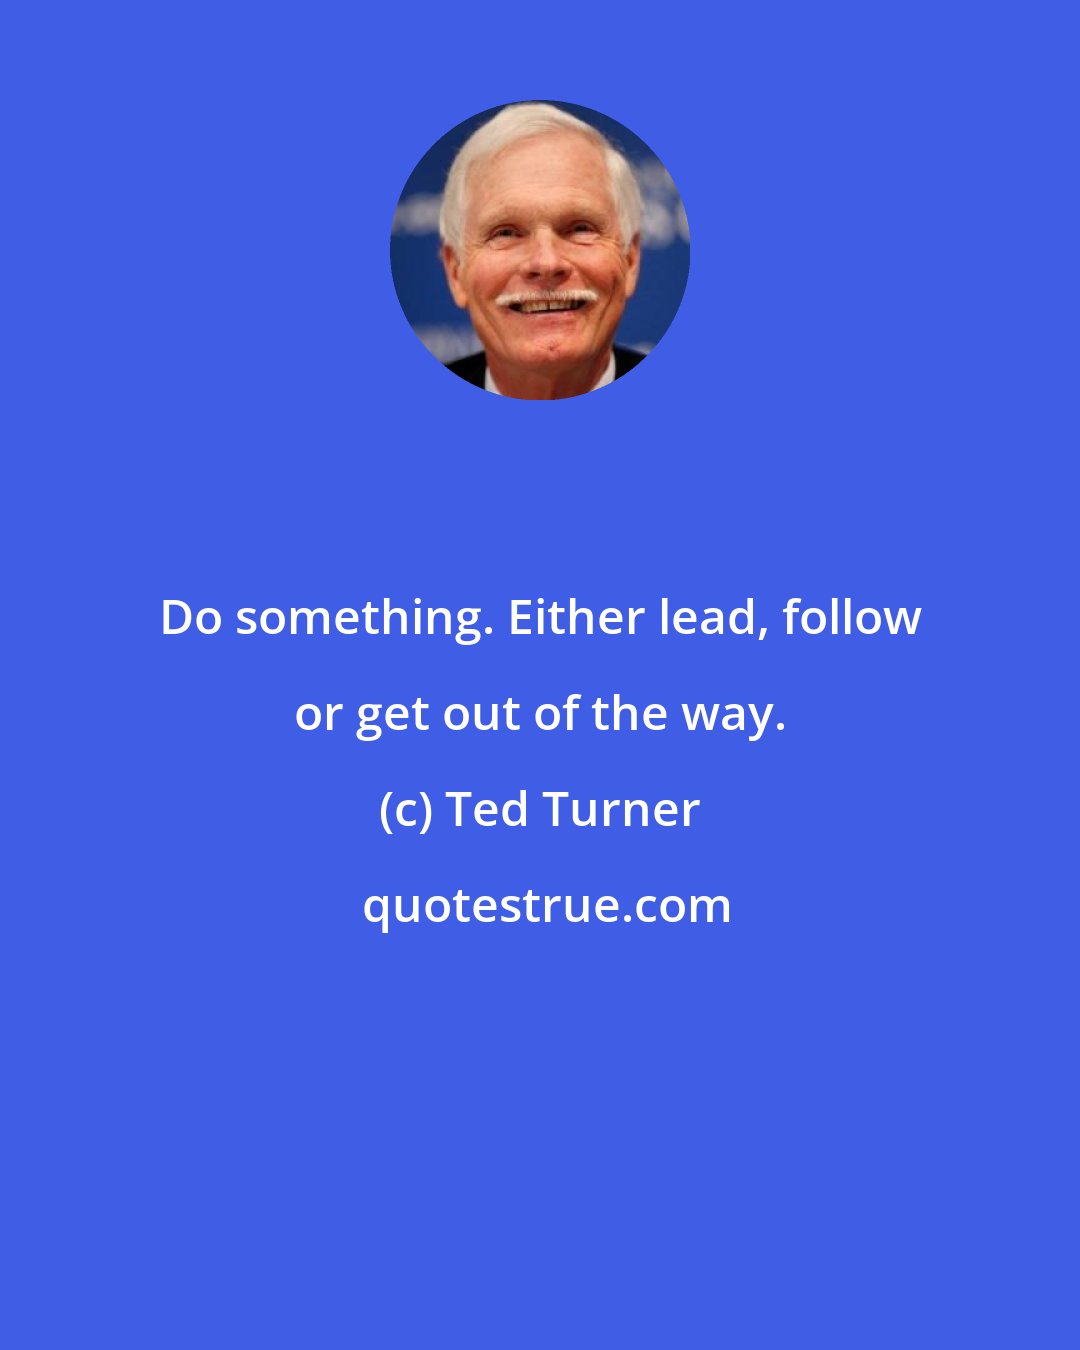 Ted Turner: Do something. Either lead, follow or get out of the way.